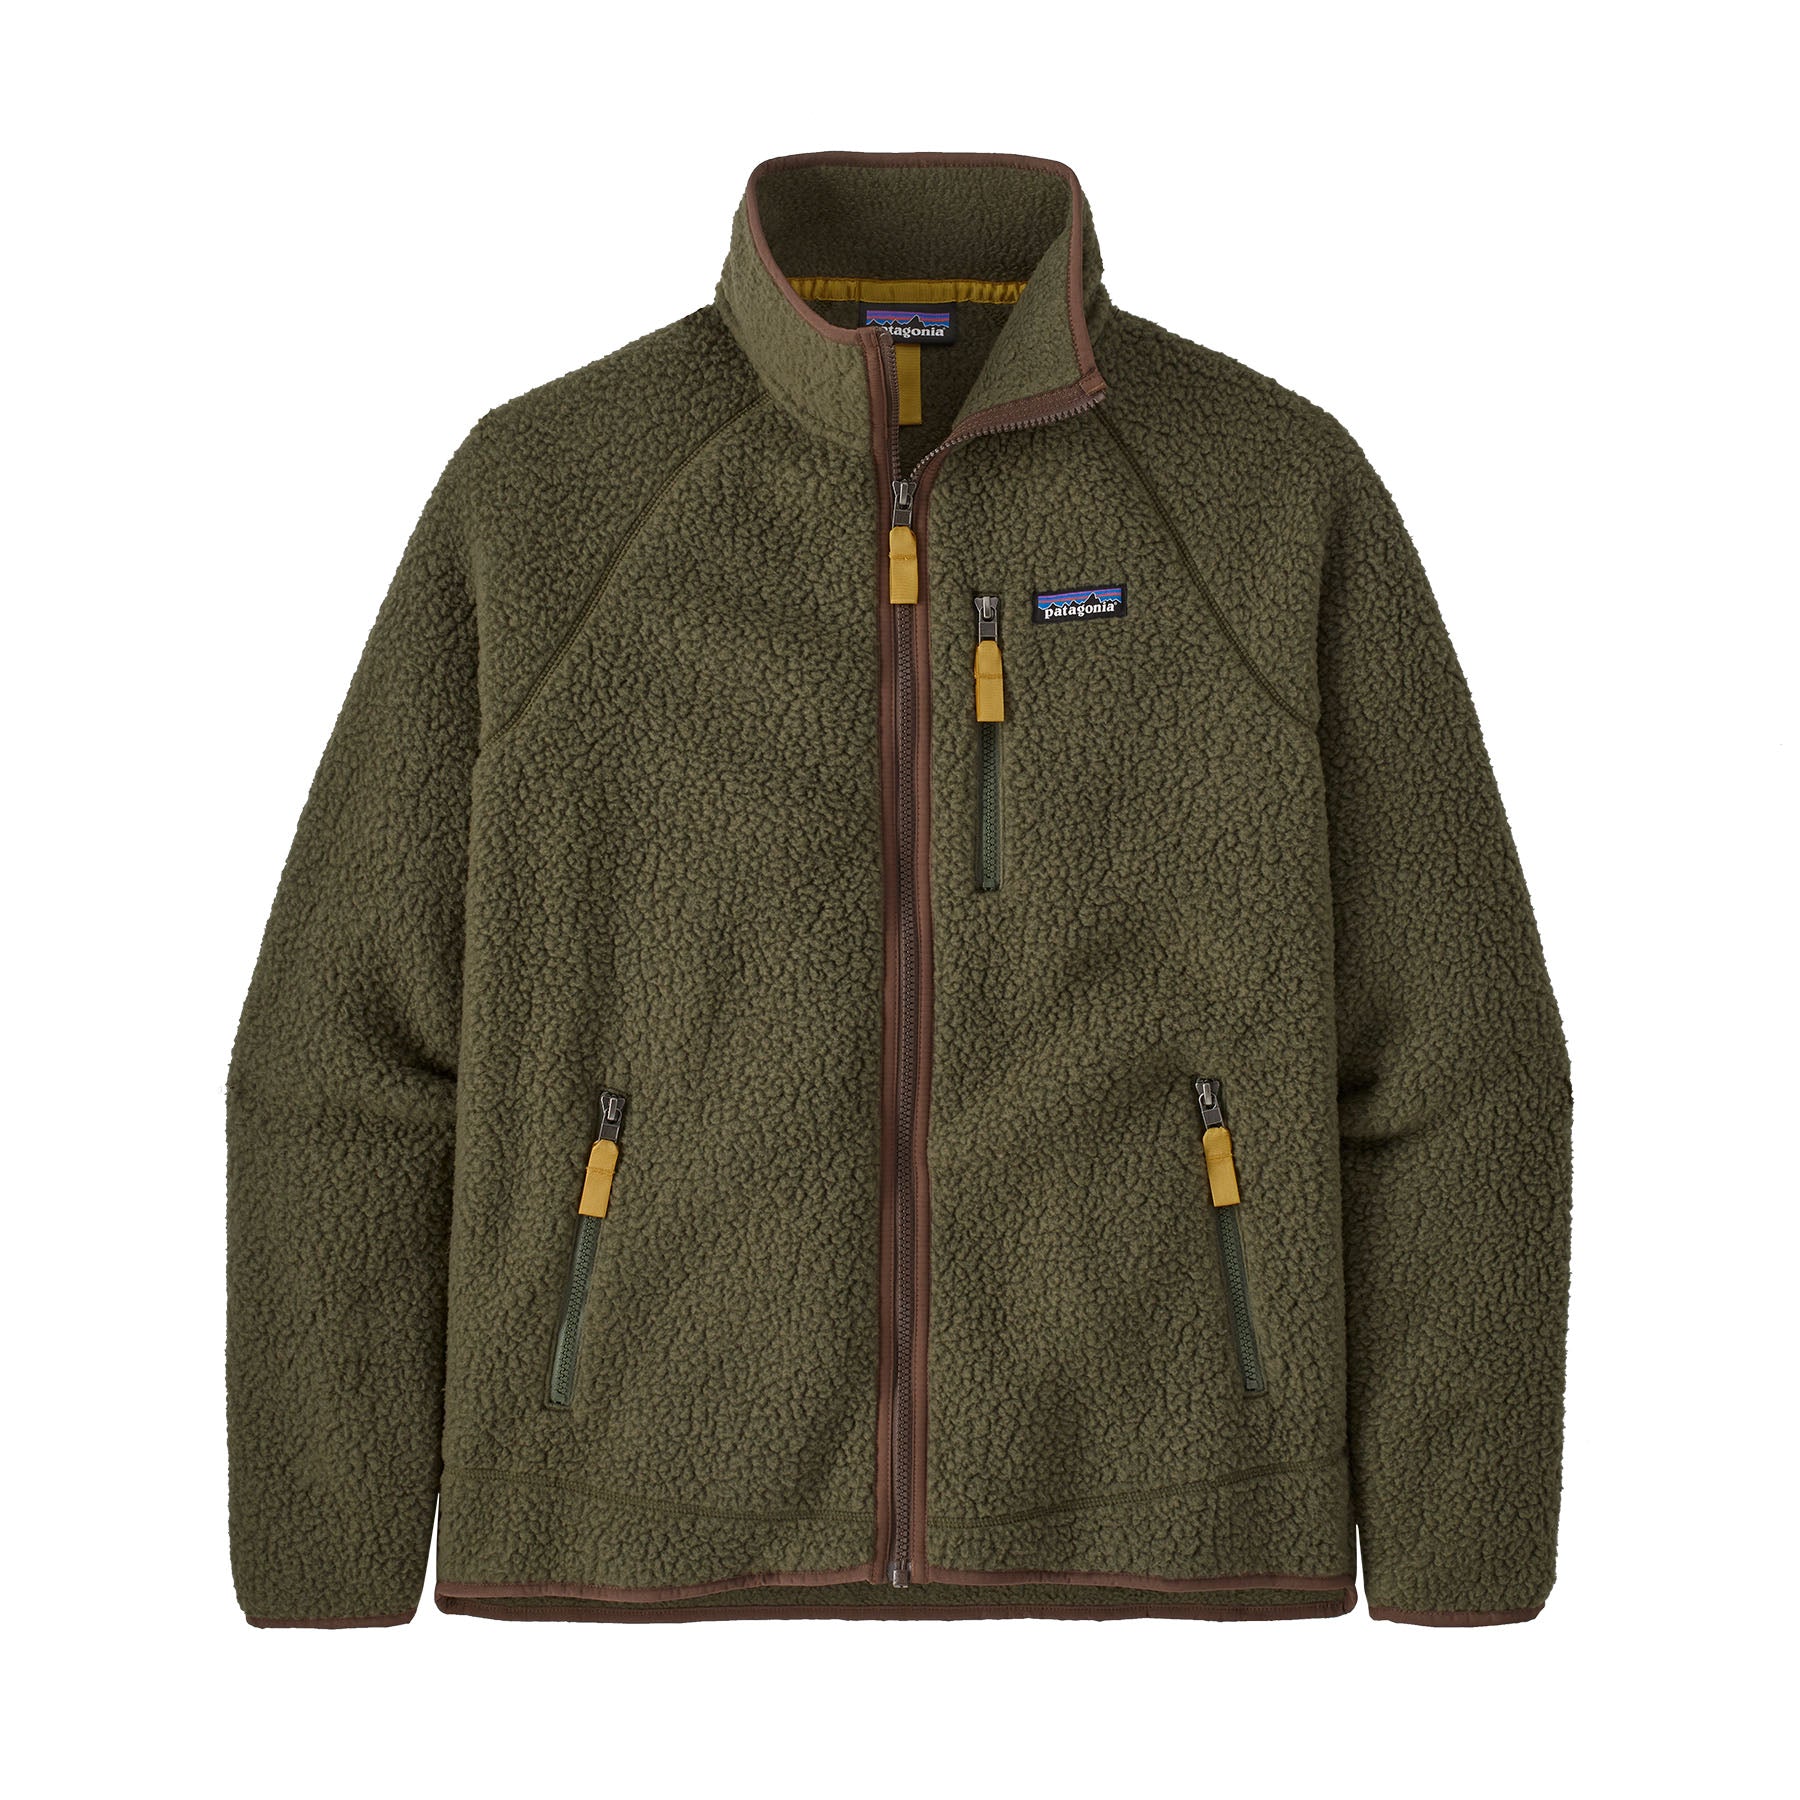 special◎patagonia pile jacket campux M身幅56センチ